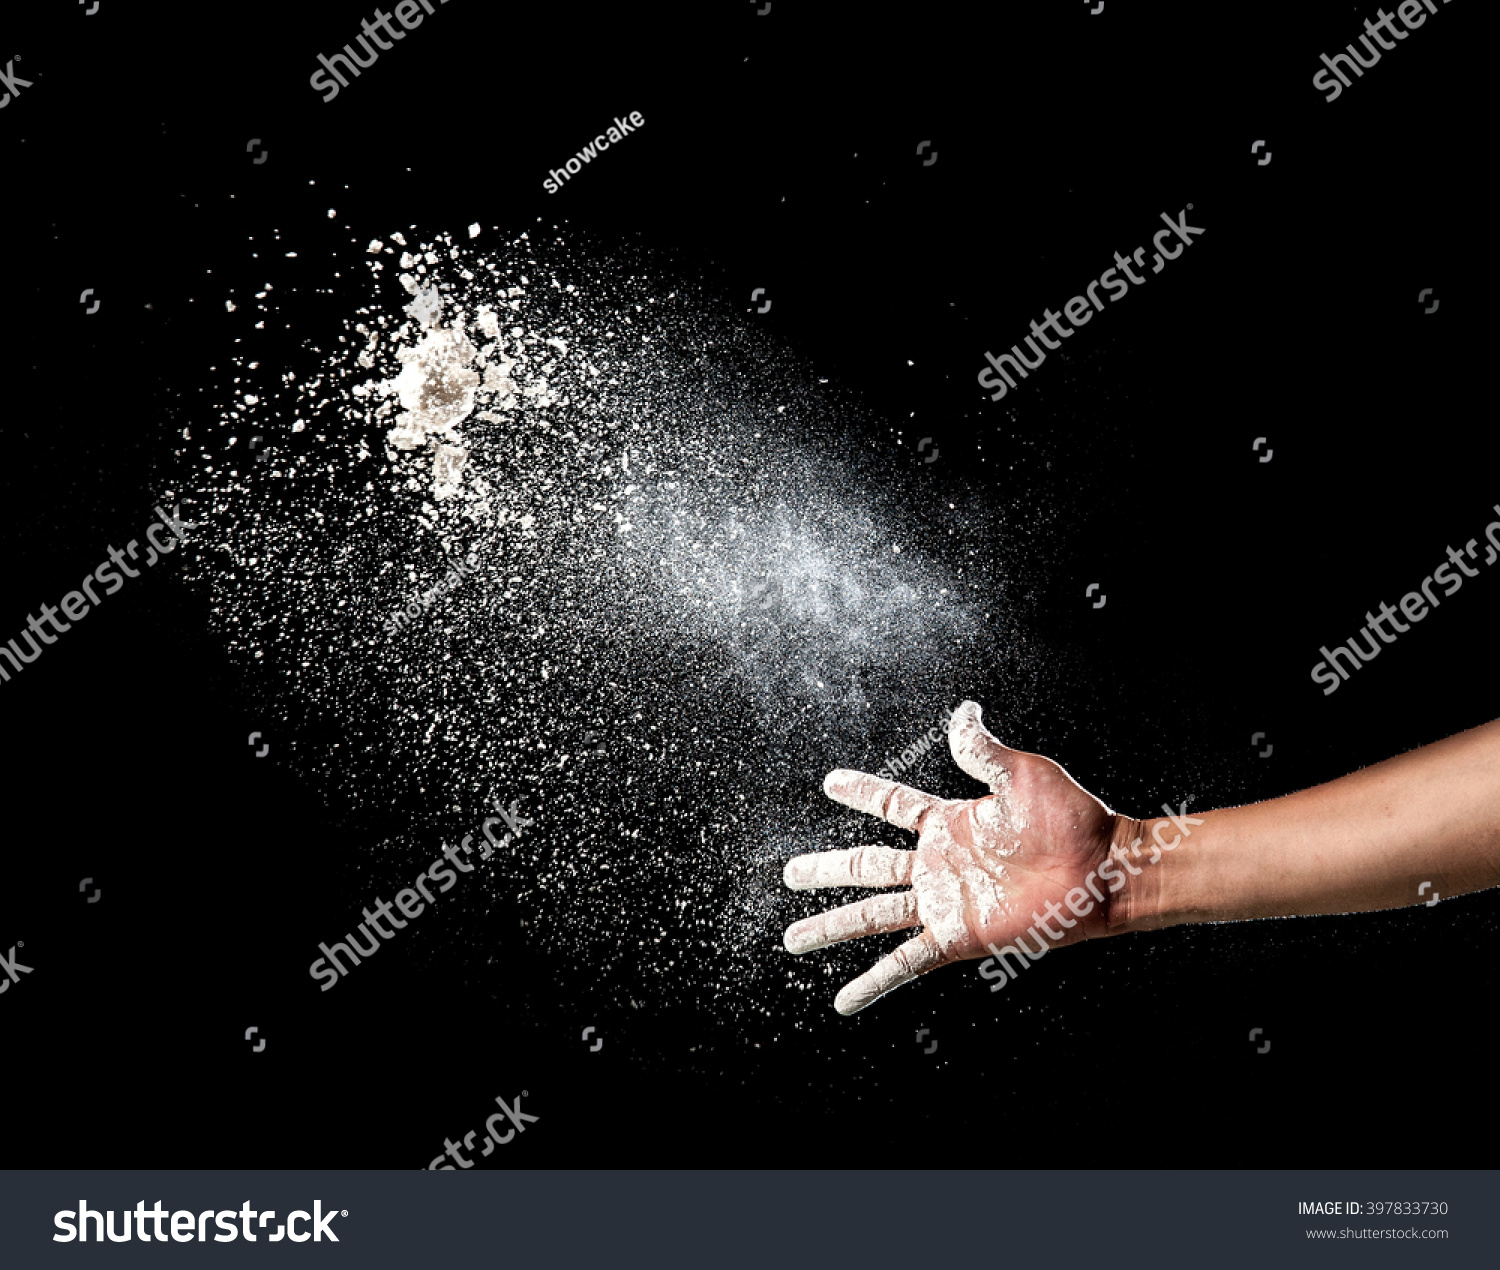 Hand and flour on black background #397833730